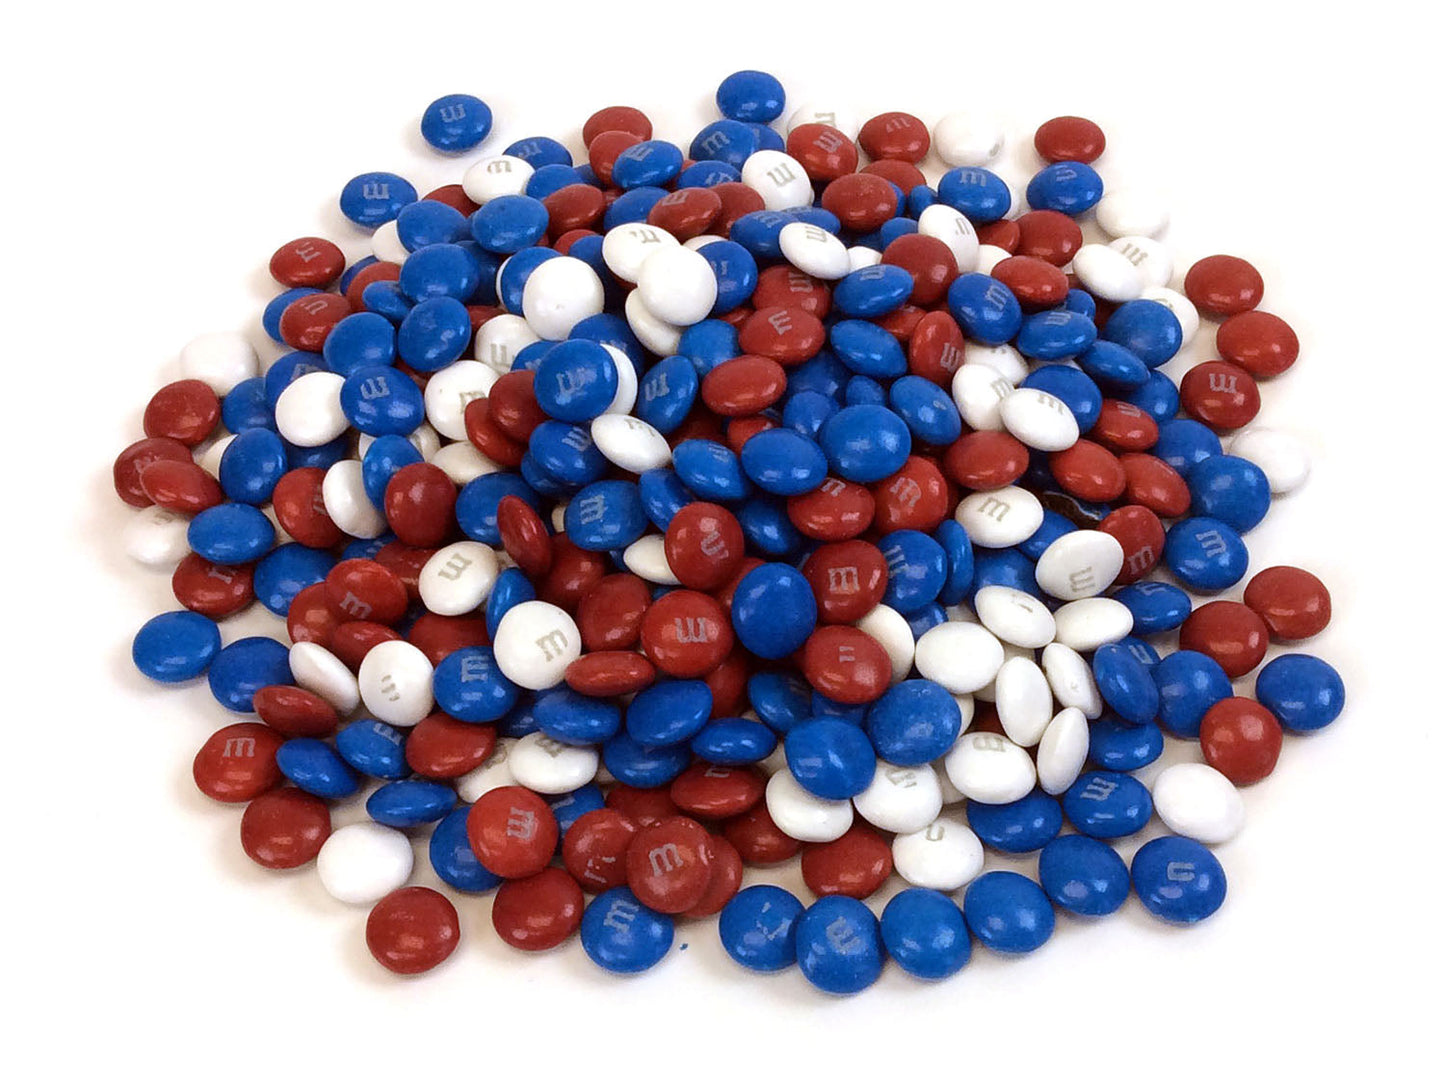  2 lbs Blue & Red M&Ms Milk Chocolate Patriotic Candy : Grocery  & Gourmet Food